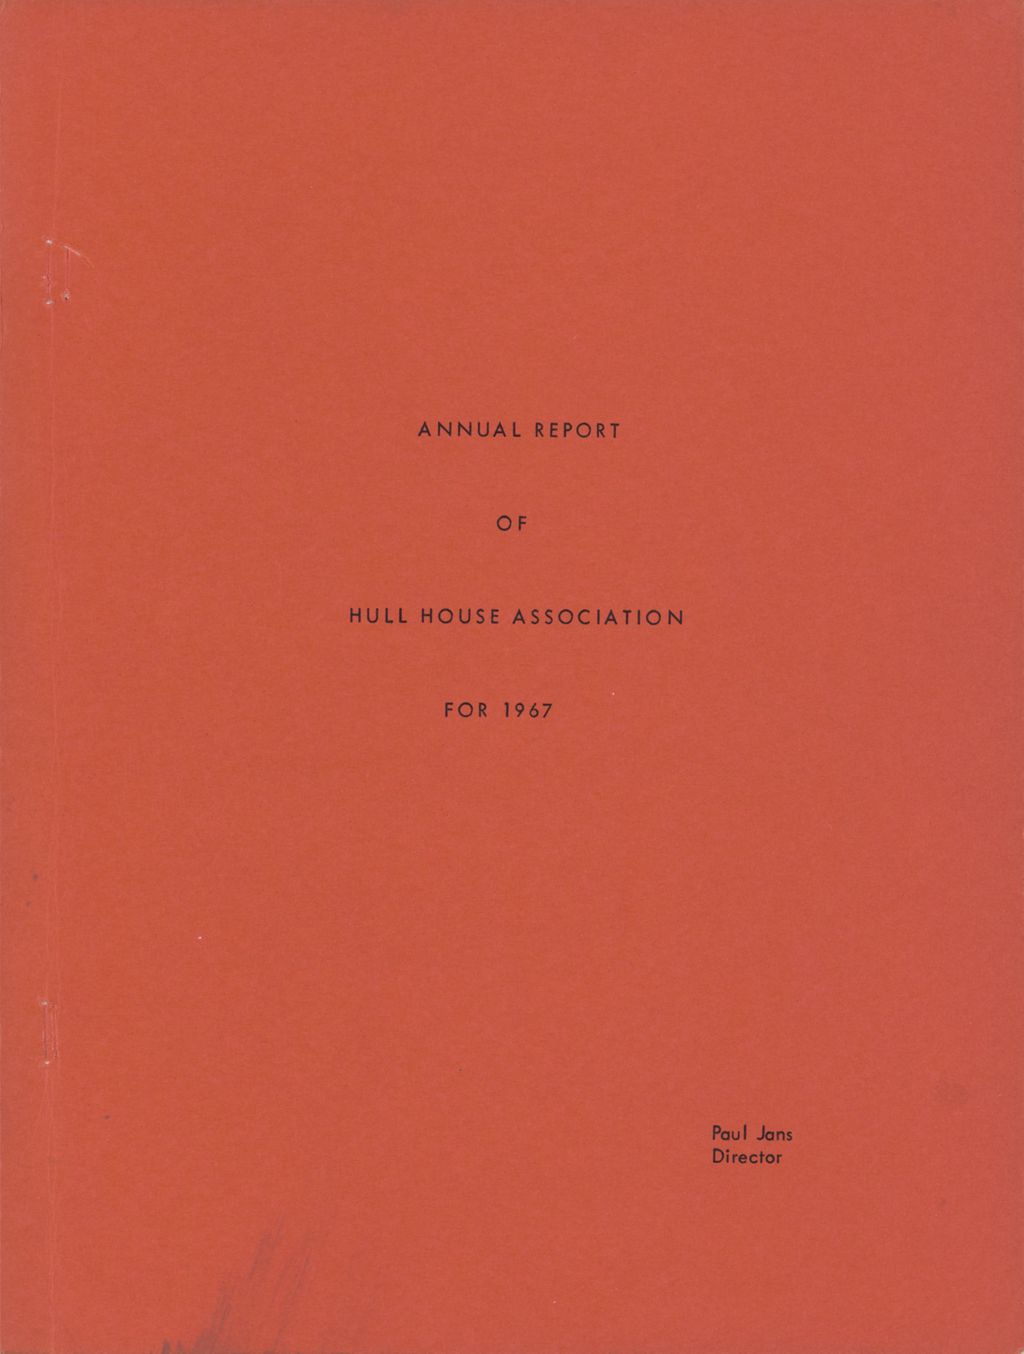 Miniature of Hull House Association, Annual Report, 1967